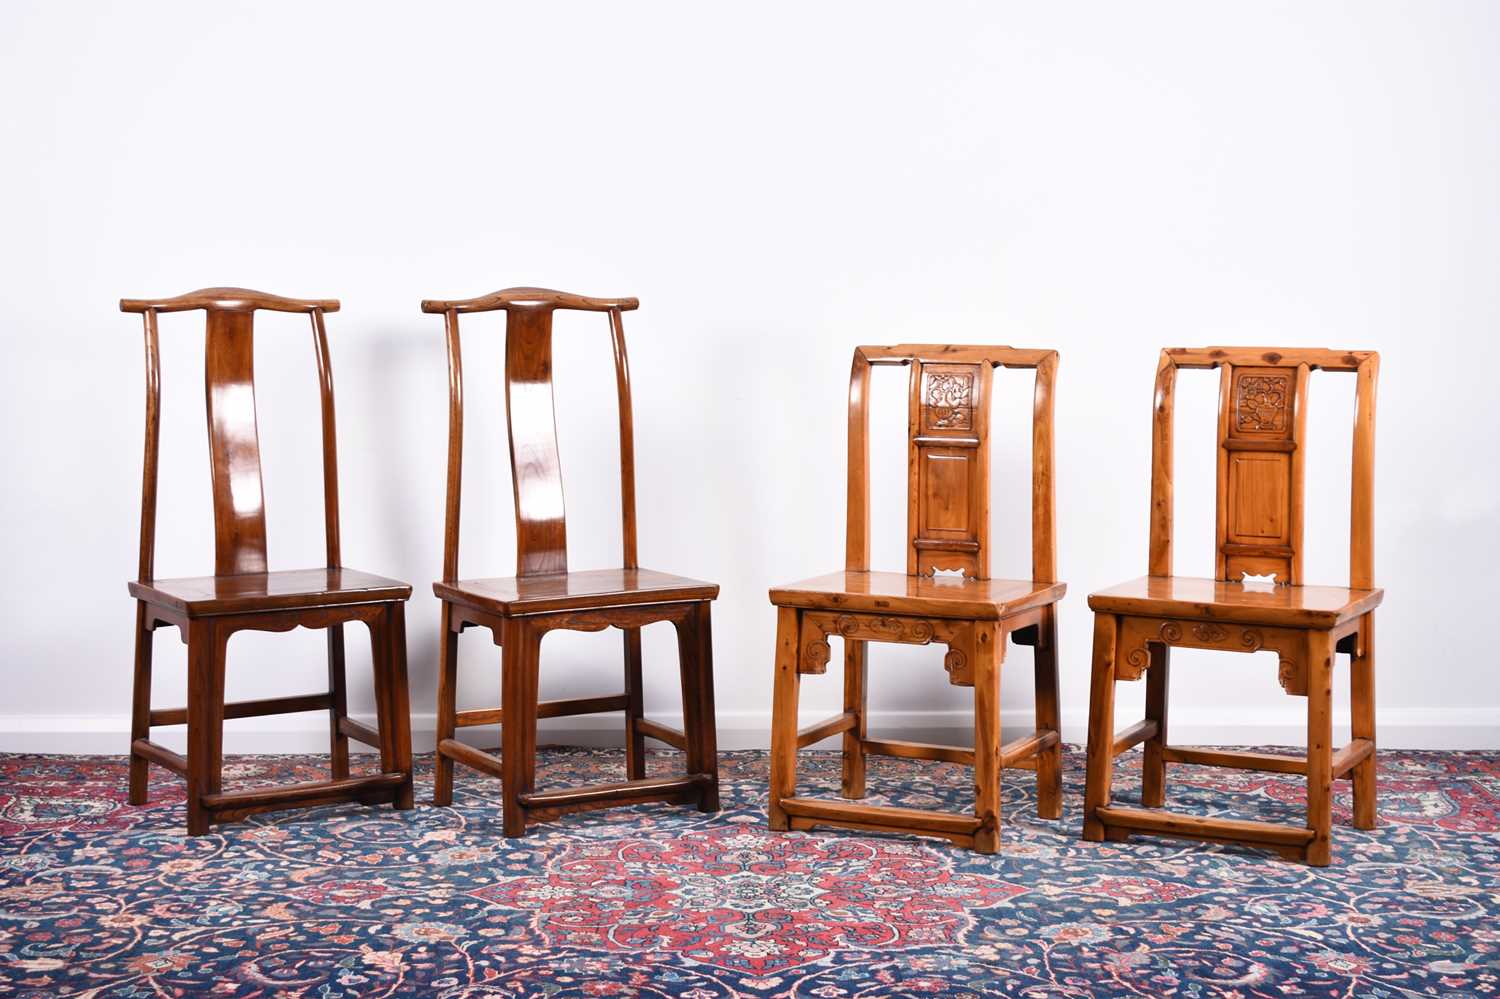 A Chinese mixed wood extending table and four chairs, 20th century - Image 3 of 4